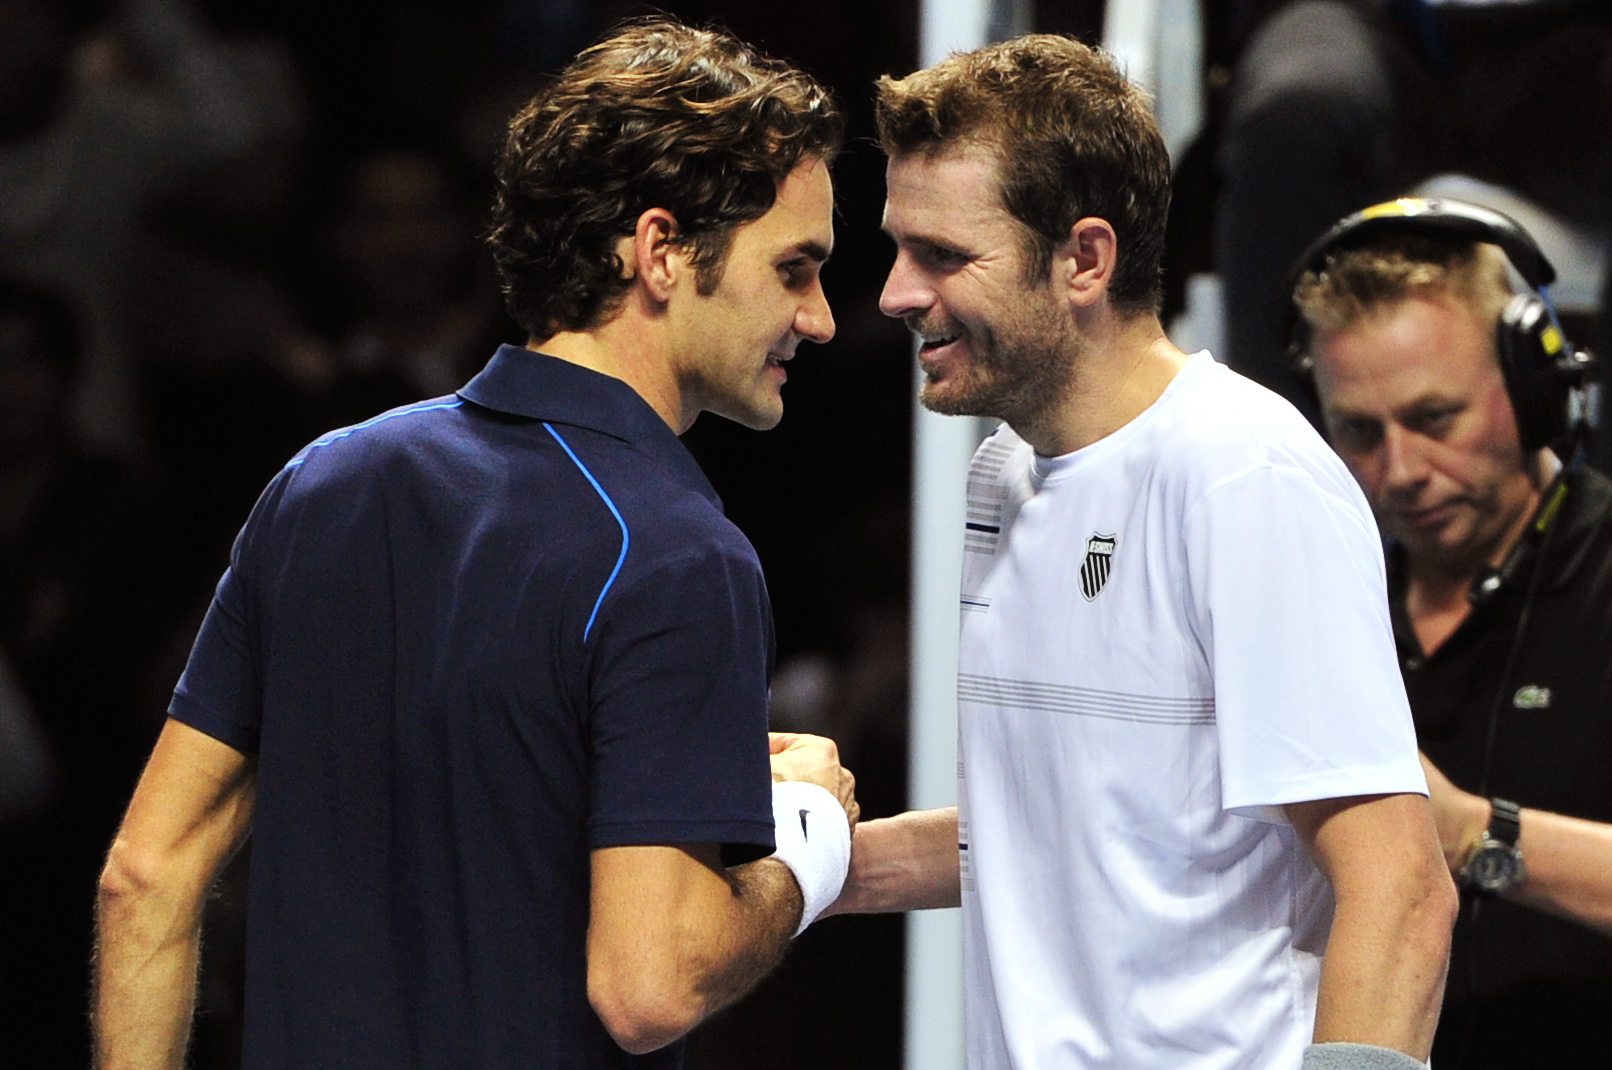 Mardy Fish took a bit of a shot at Roger Federer with his tweet recently